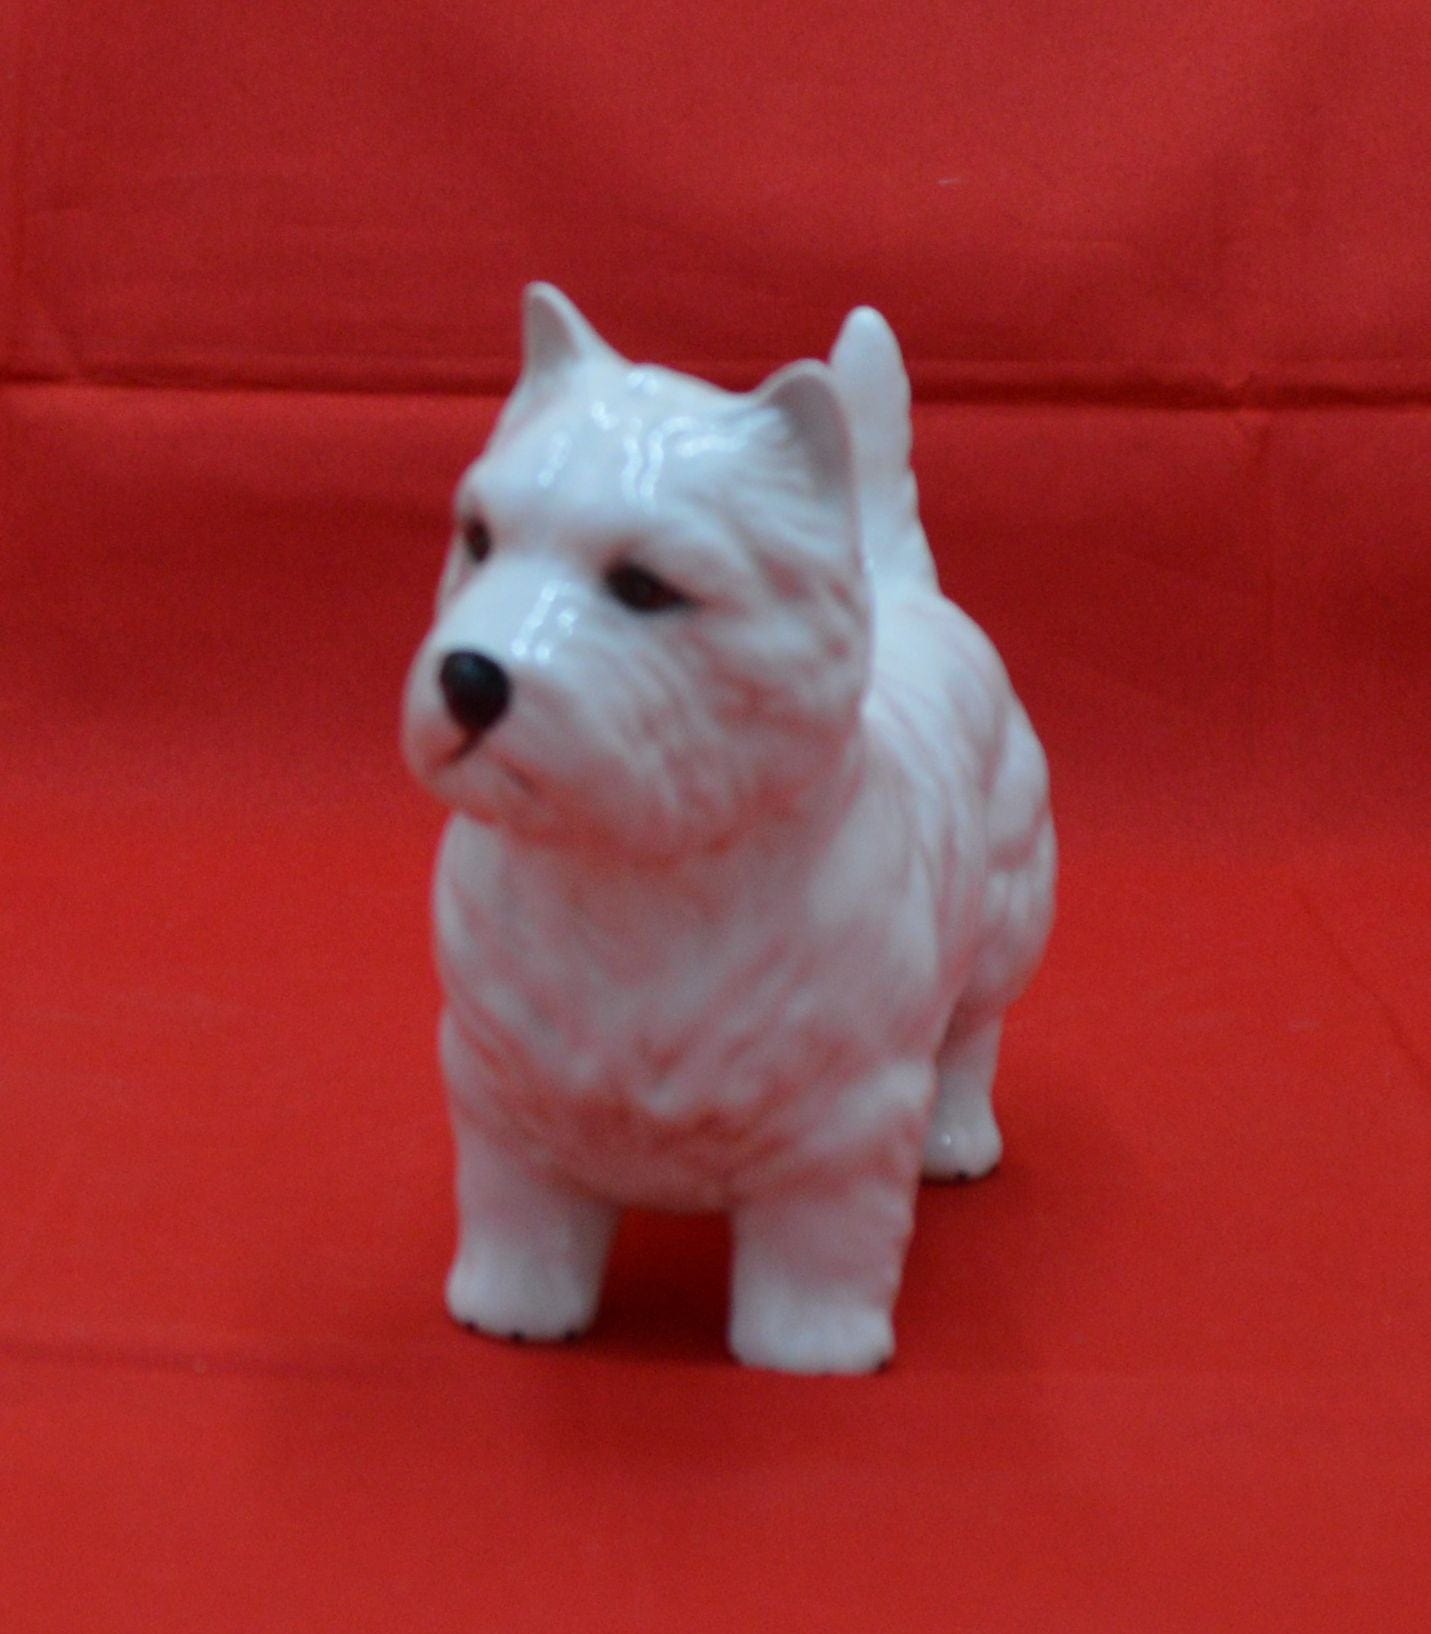 BESWICK DOG FIGURINE WEST HIGHLAND TERRIER(PREVIOUSLY OWNED) GOOD CONDITION - TMD167207